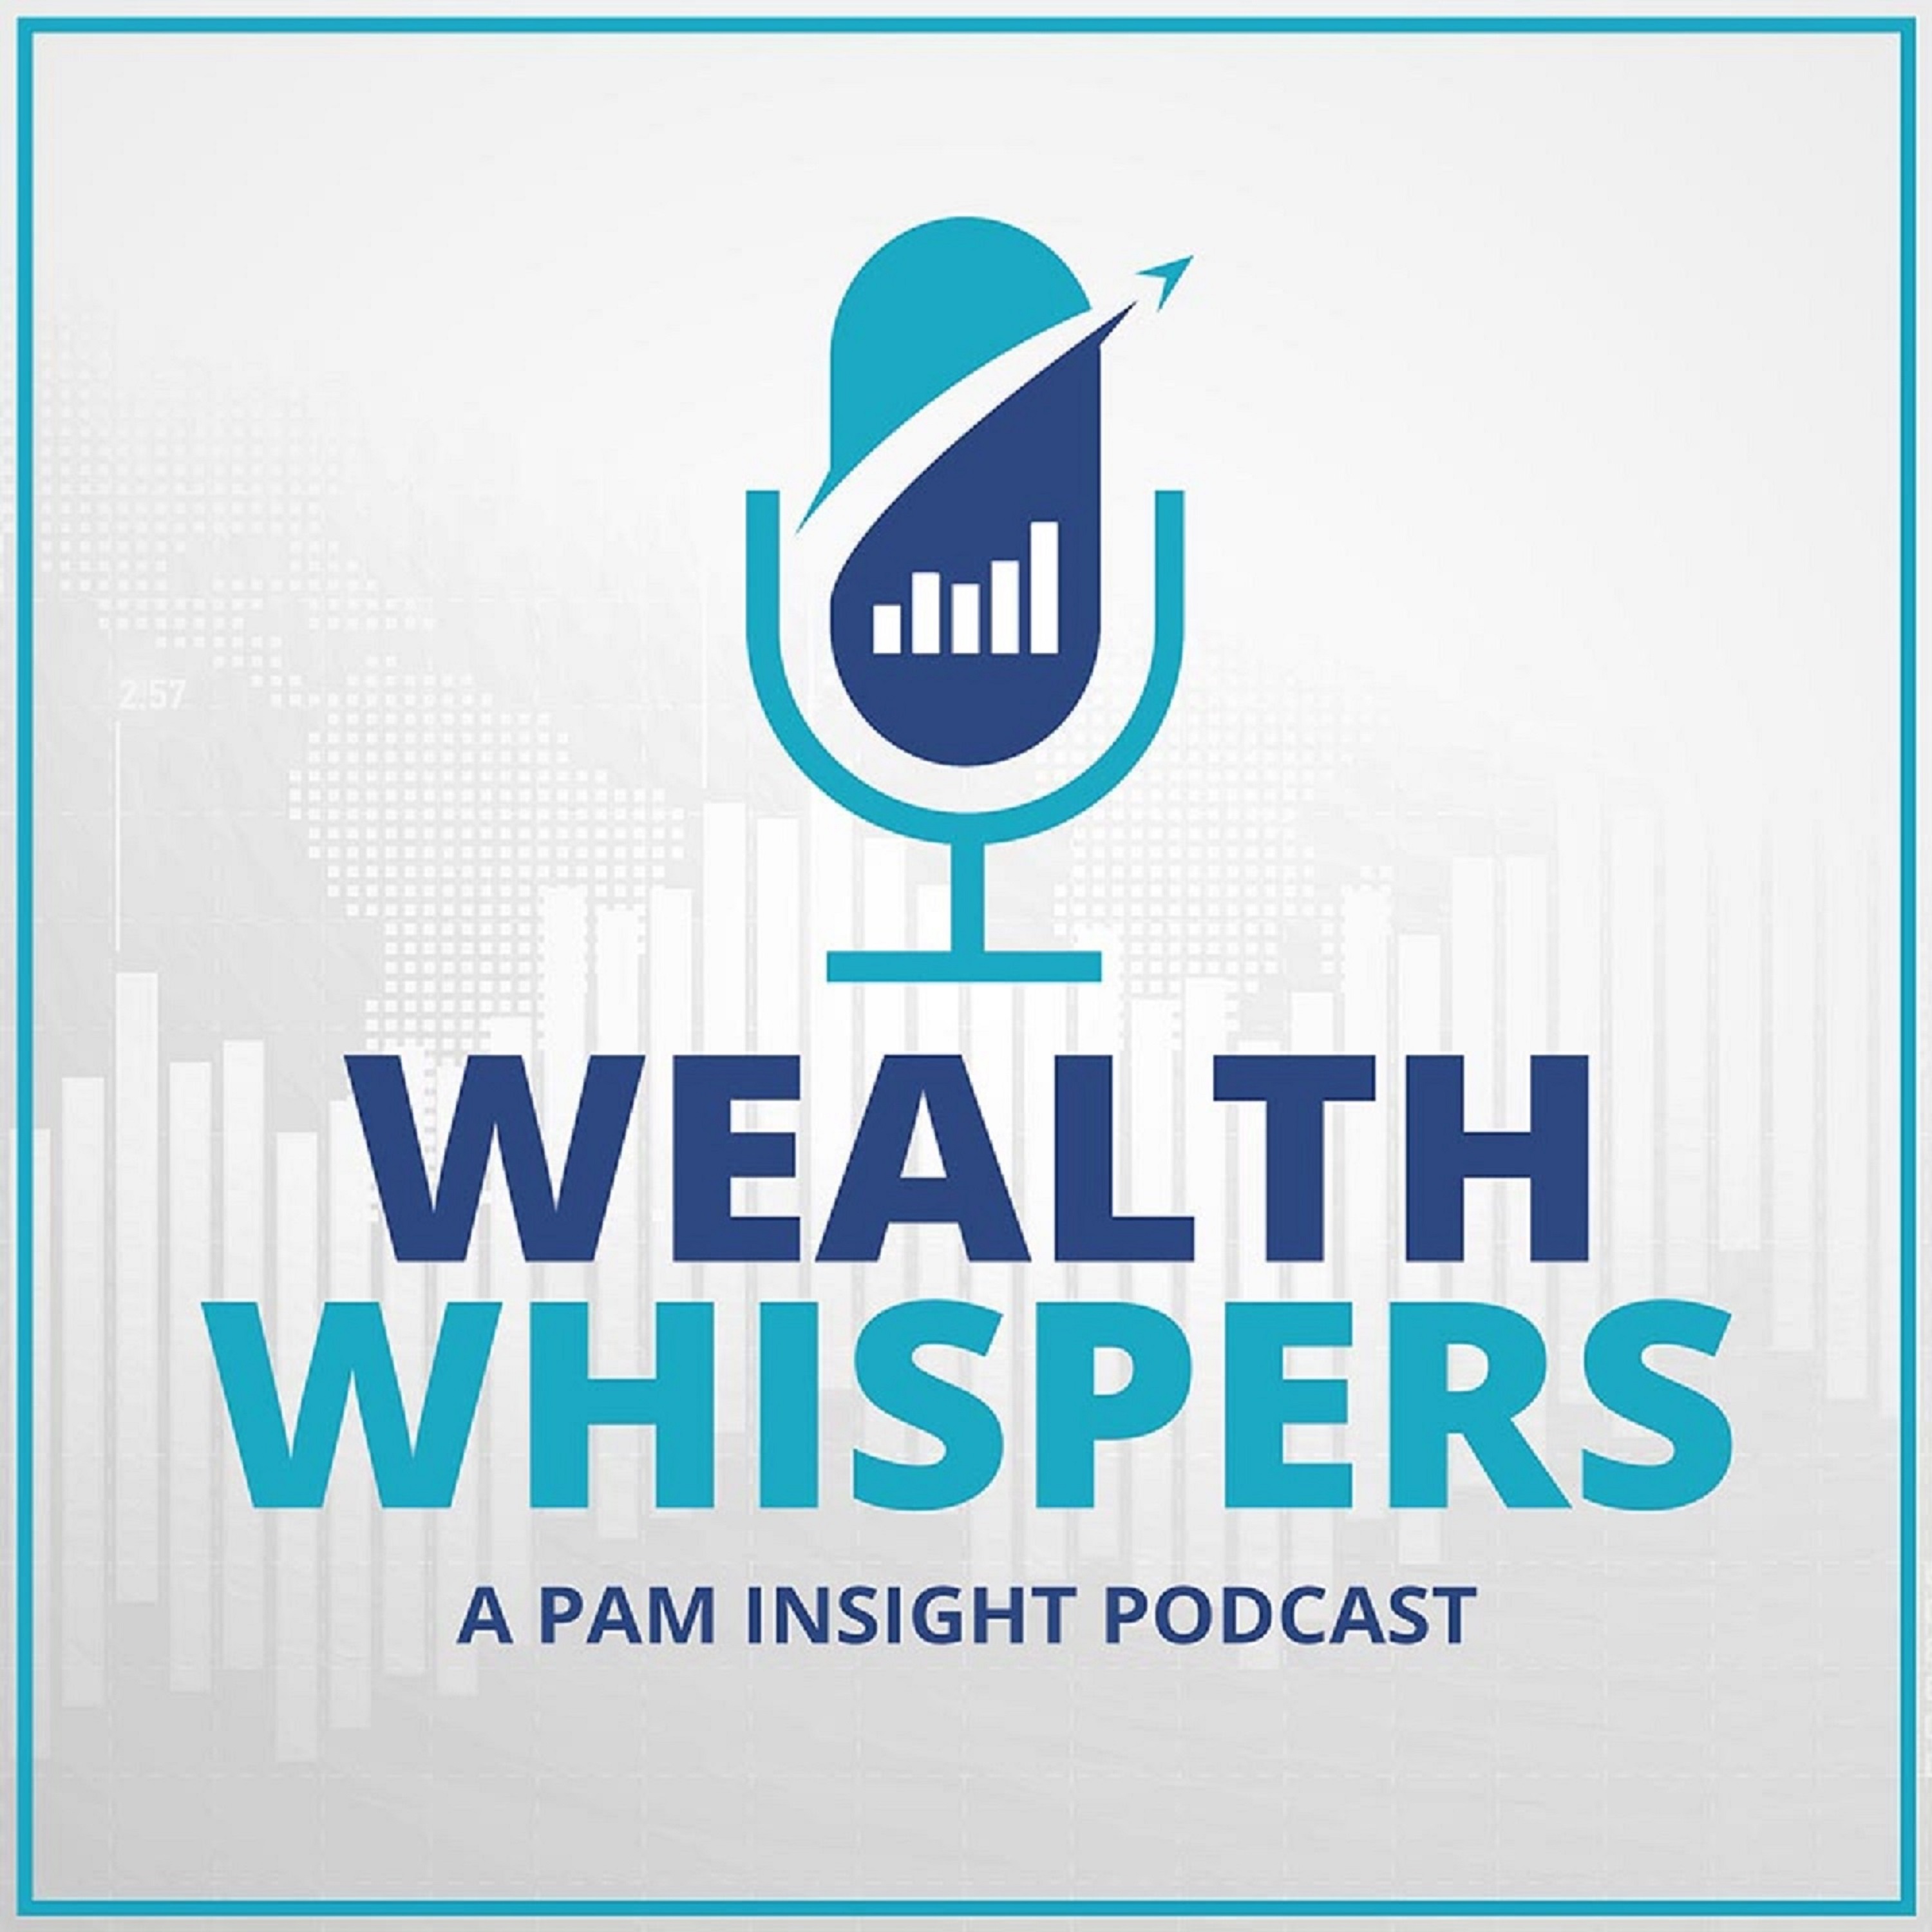 Wealth Whispers - A PAM Insight Podcast